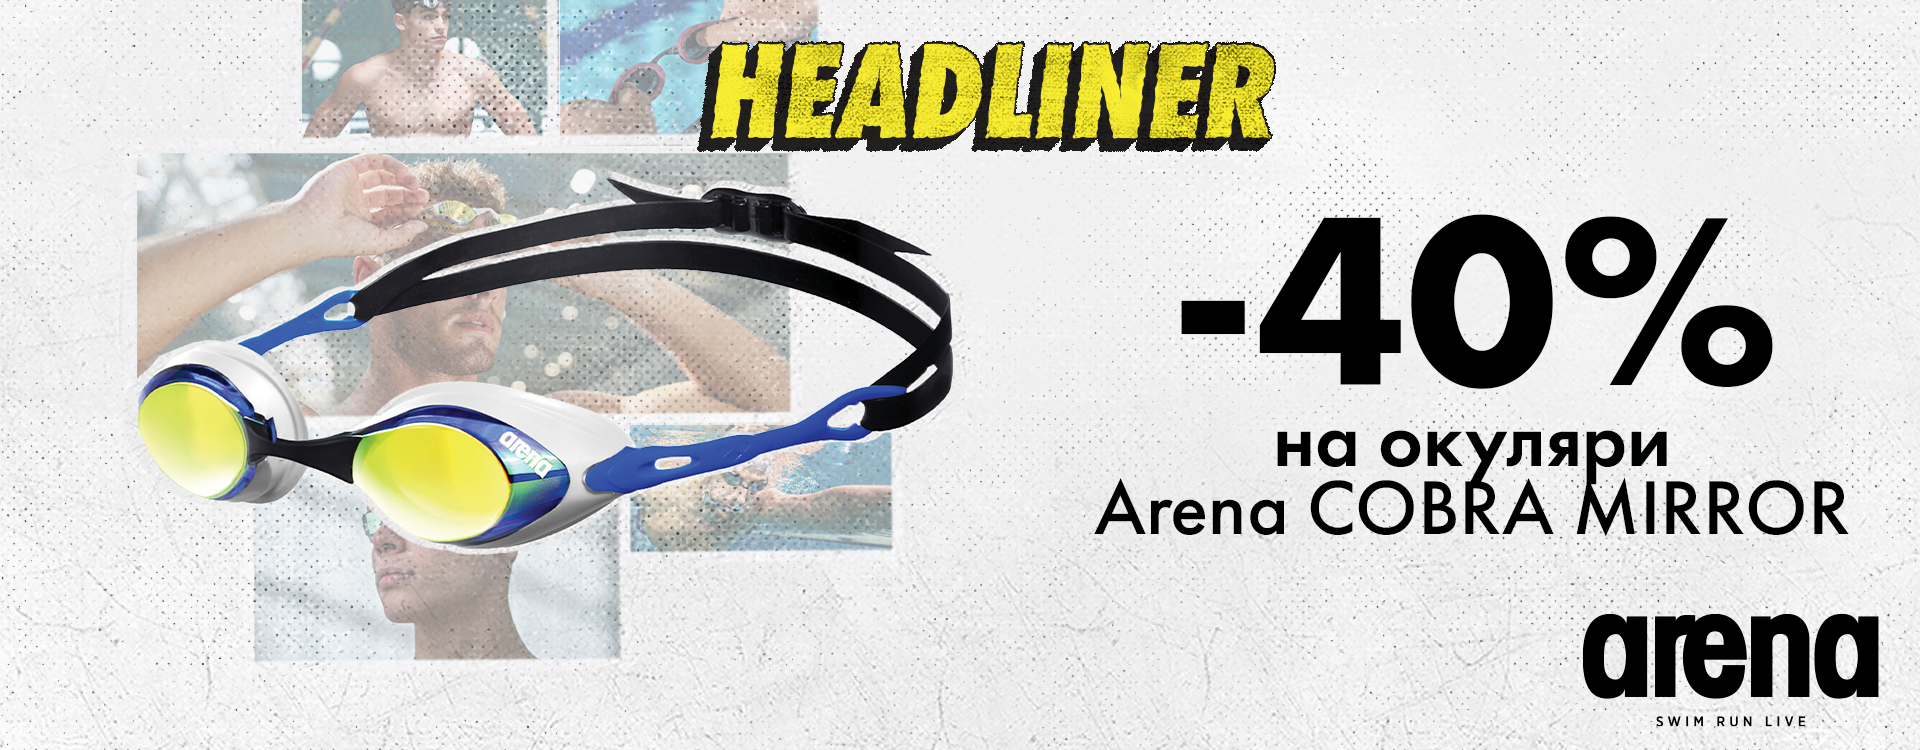 The headliner of the week in the Arena